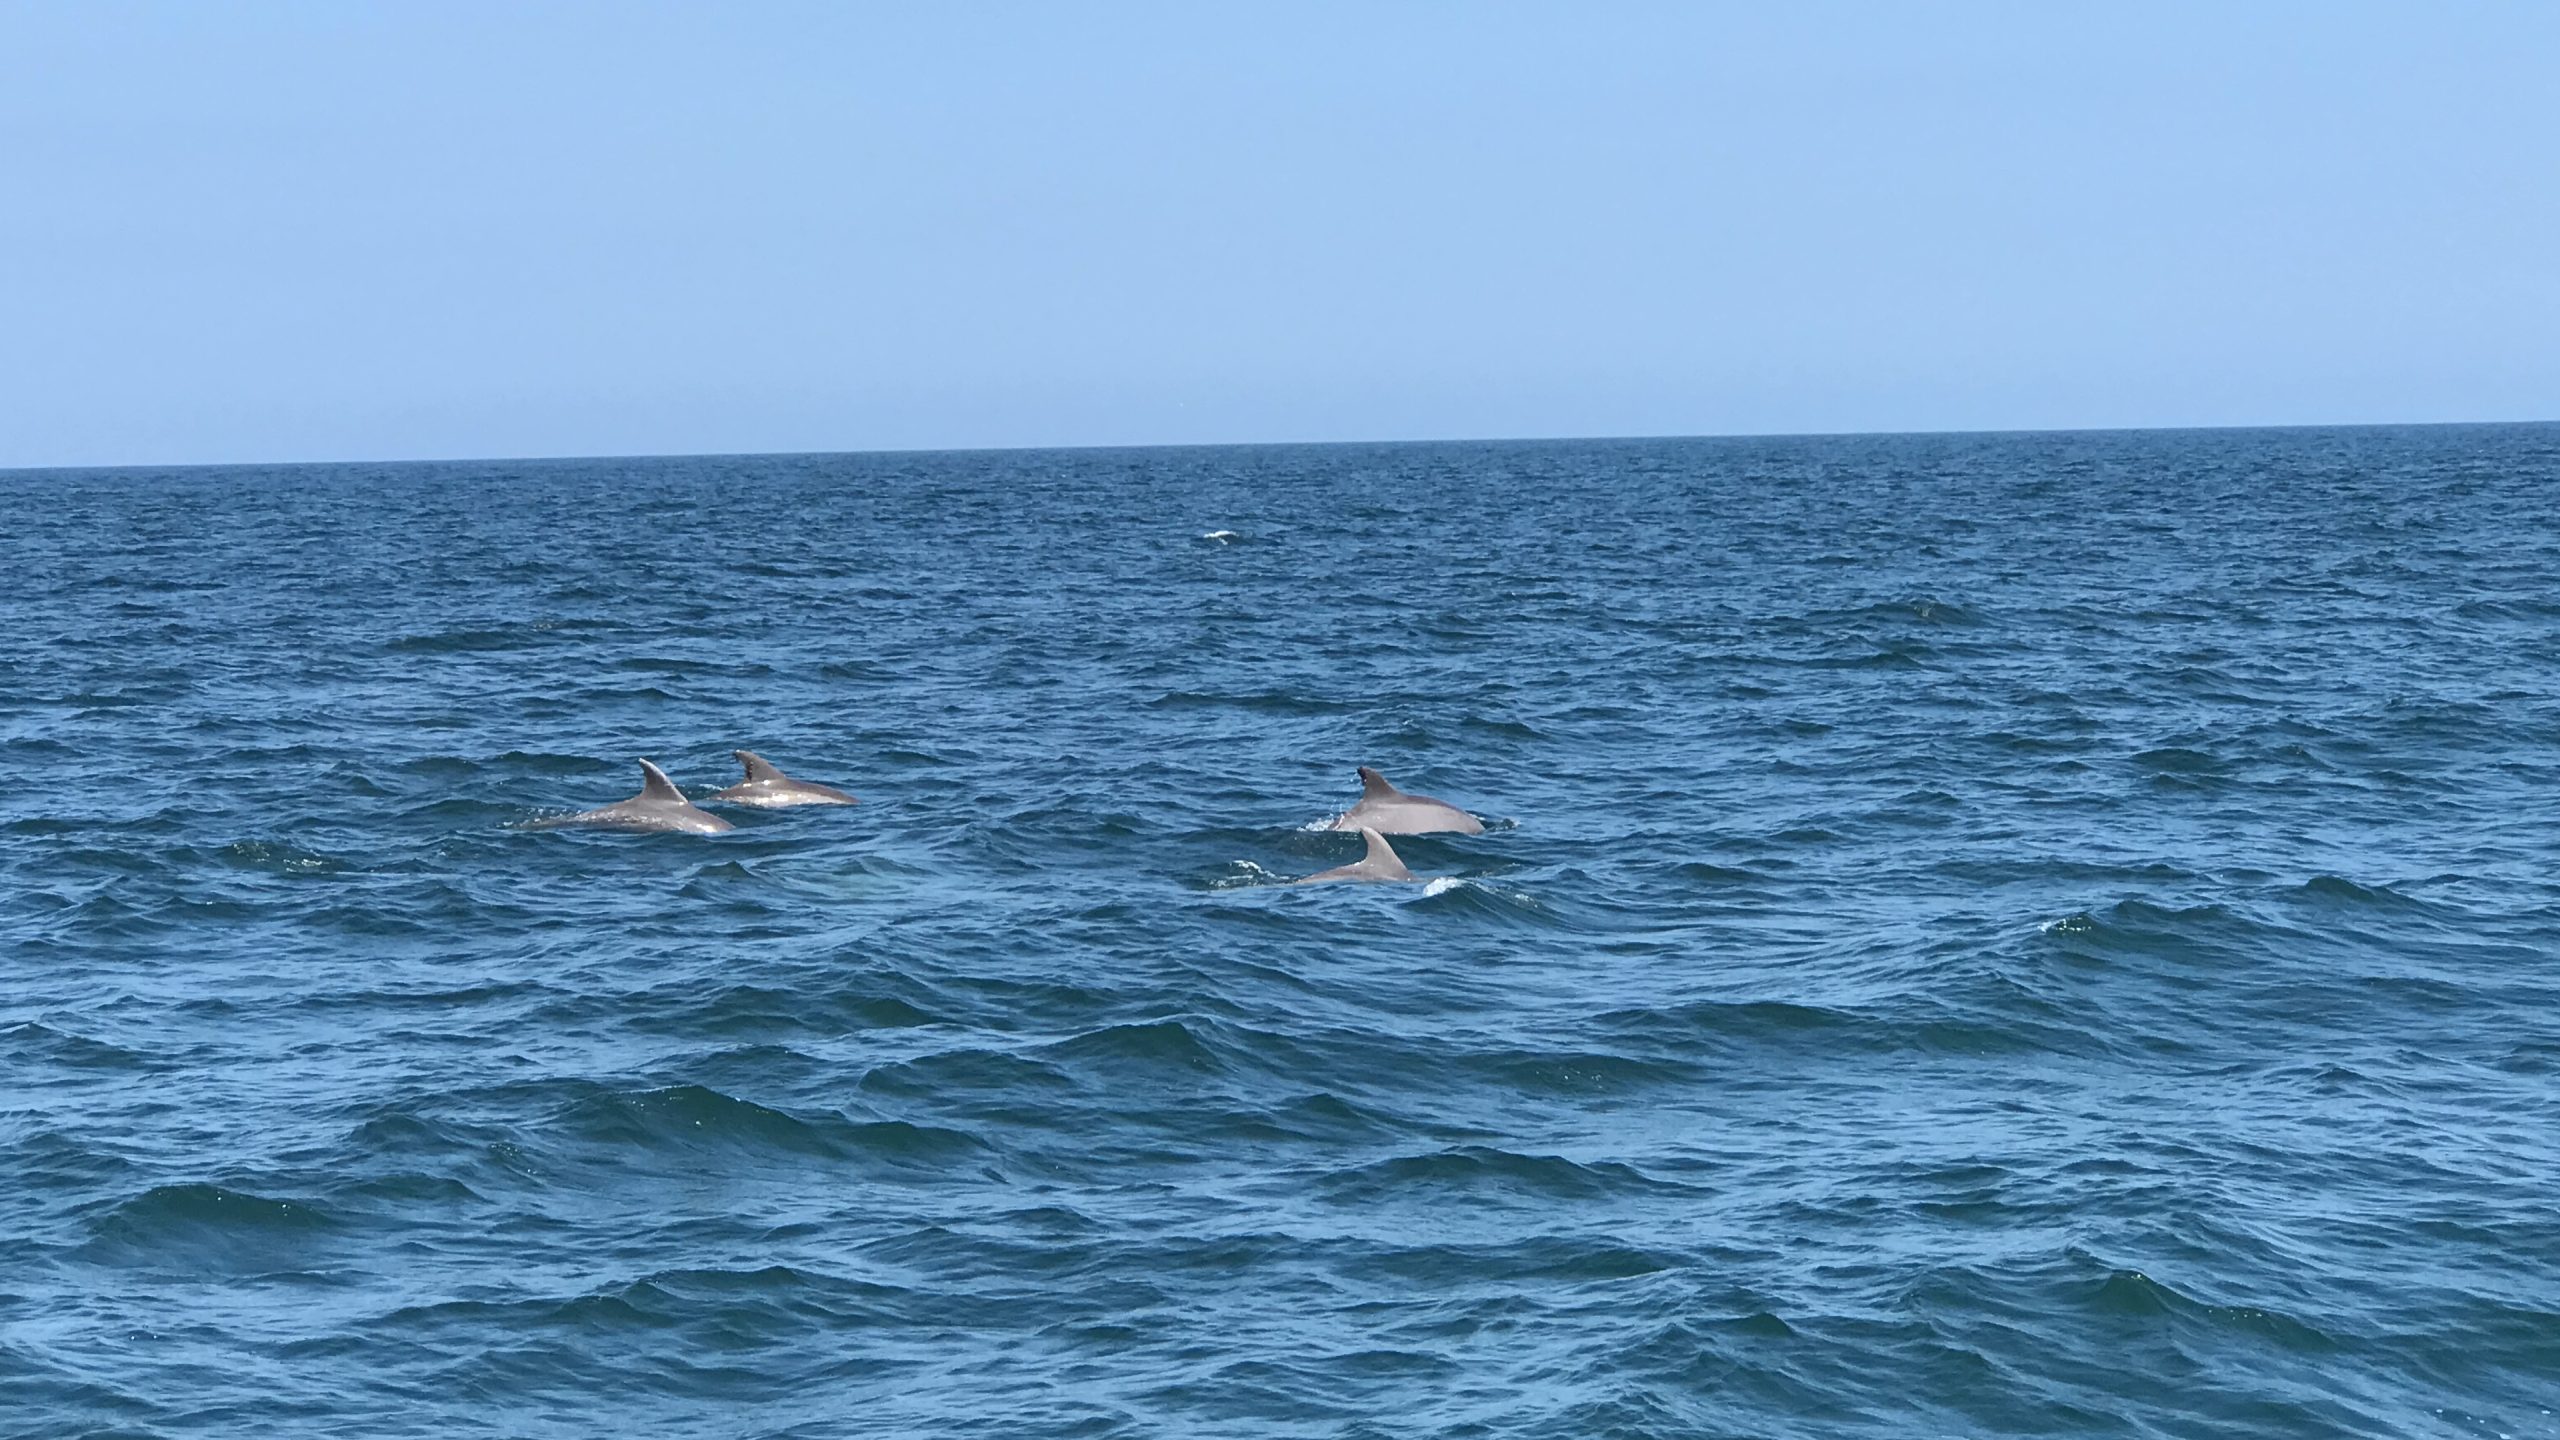 dolphins in the water off of Atlantic City NJ